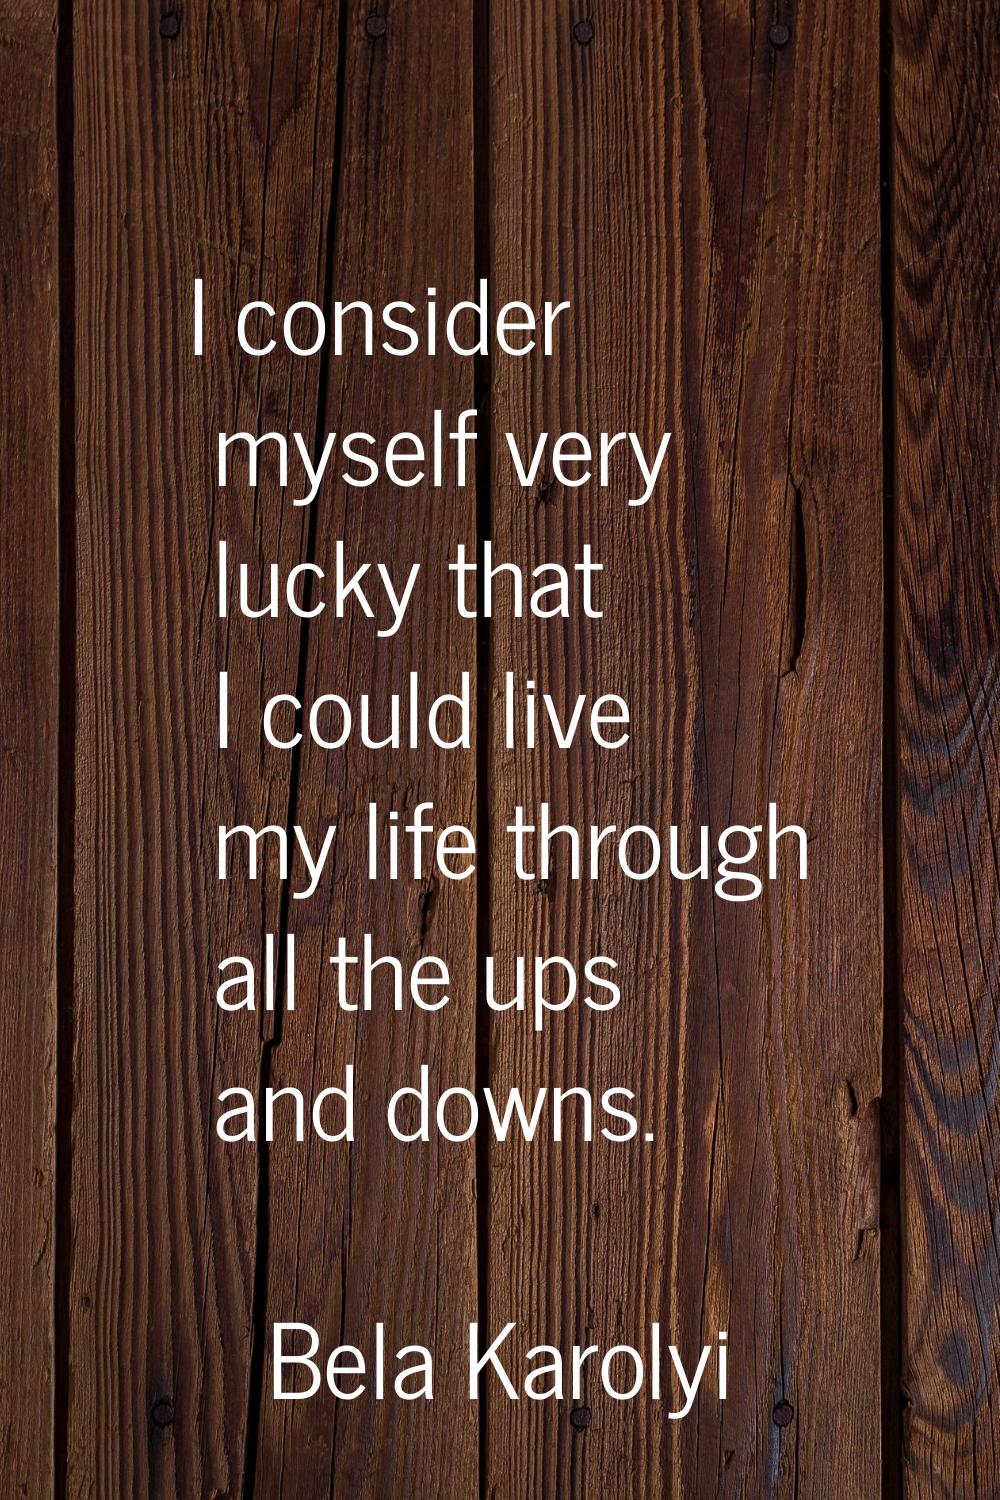 I consider myself very lucky that I could live my life through all the ups and downs.